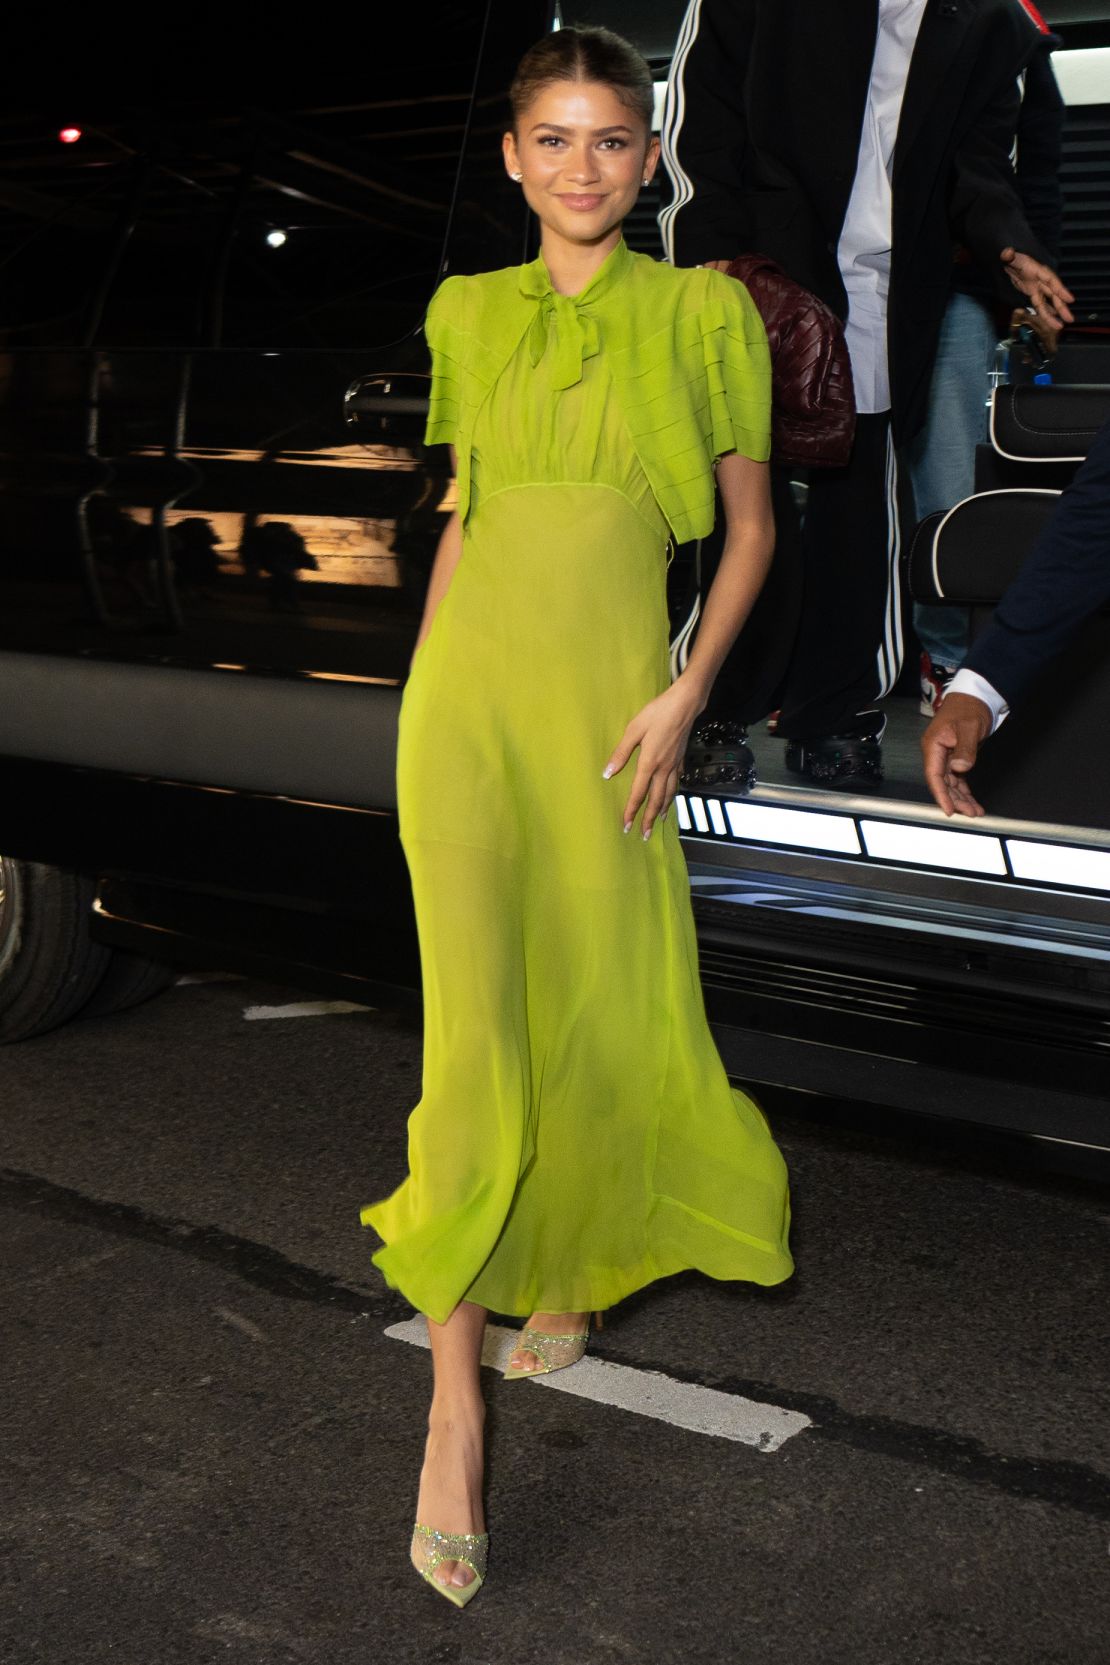 On April 24, the actor stepped out in a twee silk chiffon dress — a vintage piece nearly a century old, "<a href="https://www.vogue.com/article/zendaya-challengers-look-nearly-100-years-old" target="_blank">Vogue" reported</a> — and matching cropped jacket in the acid green (read: tennis ball) hue that had repeated throughout the "Challengers" press tour.